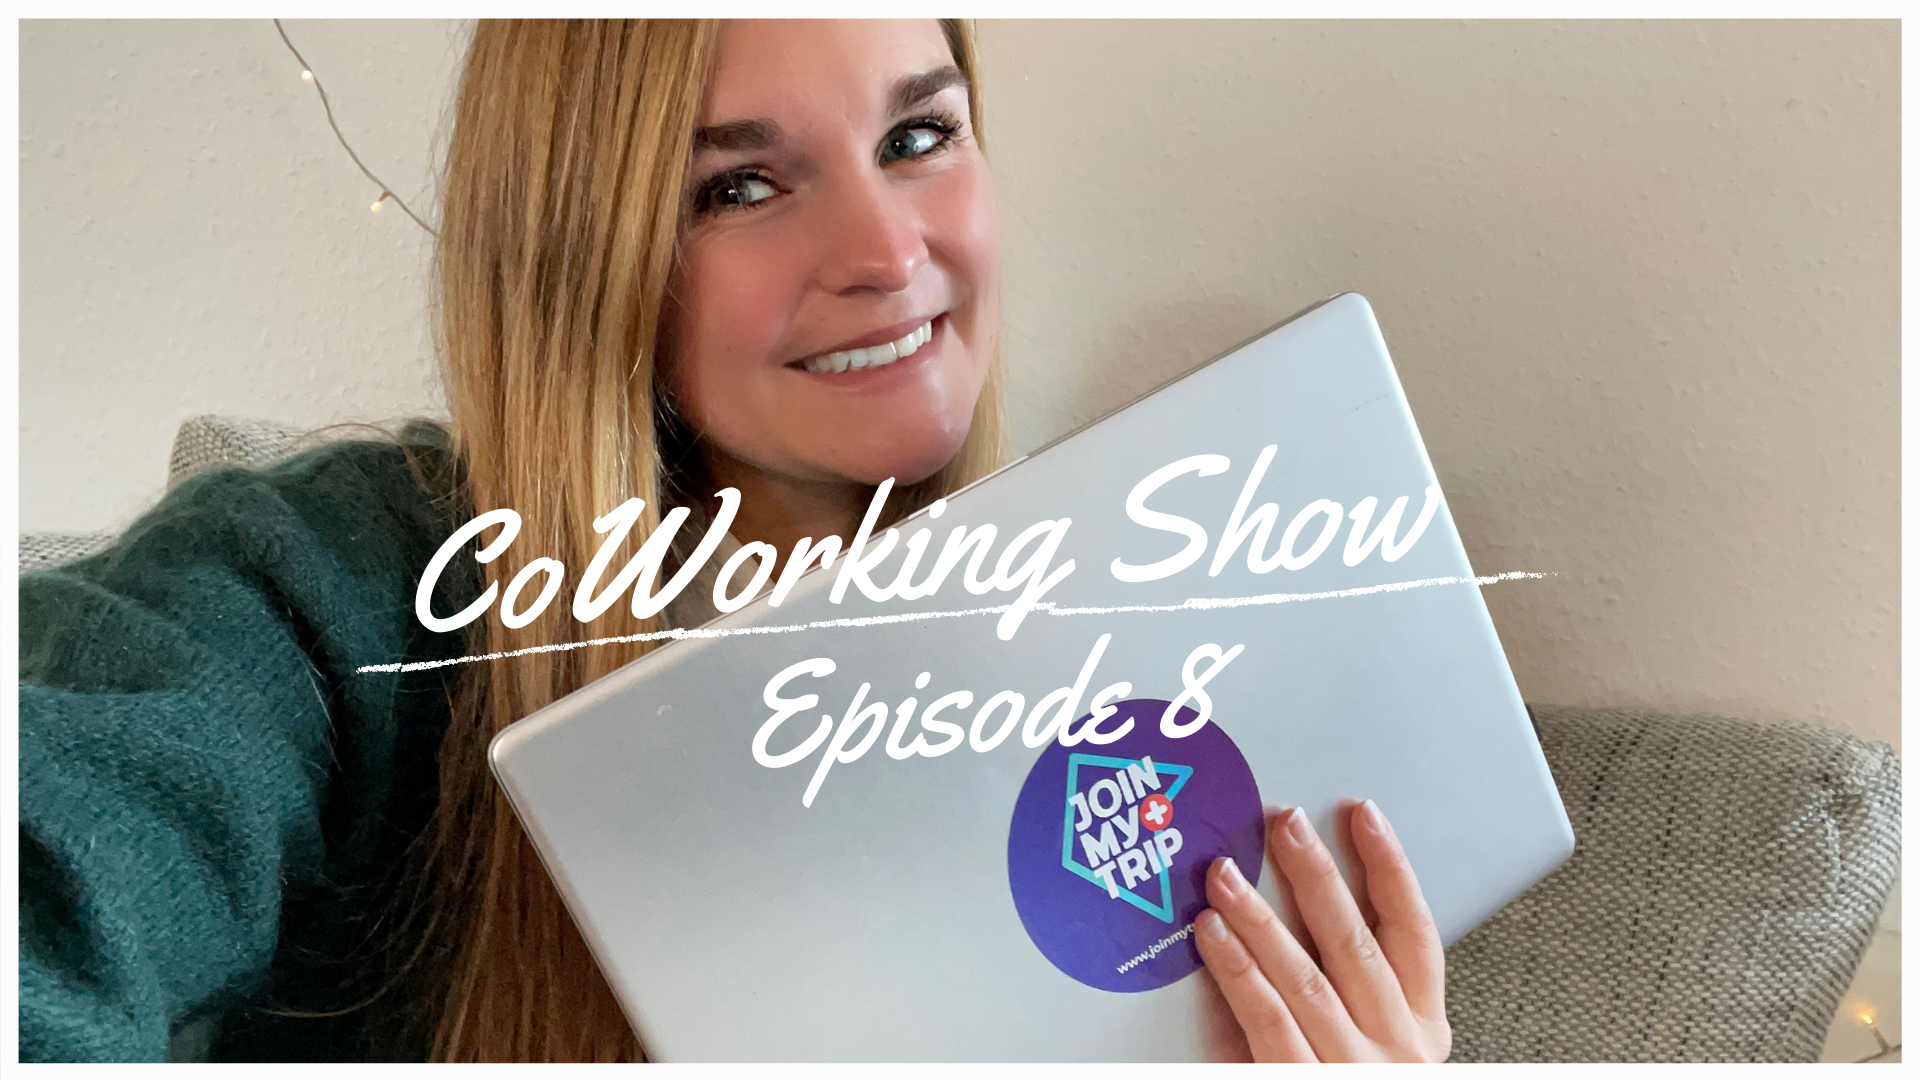 What To Pack On A Remote Coworking Trip | CoWorking Show